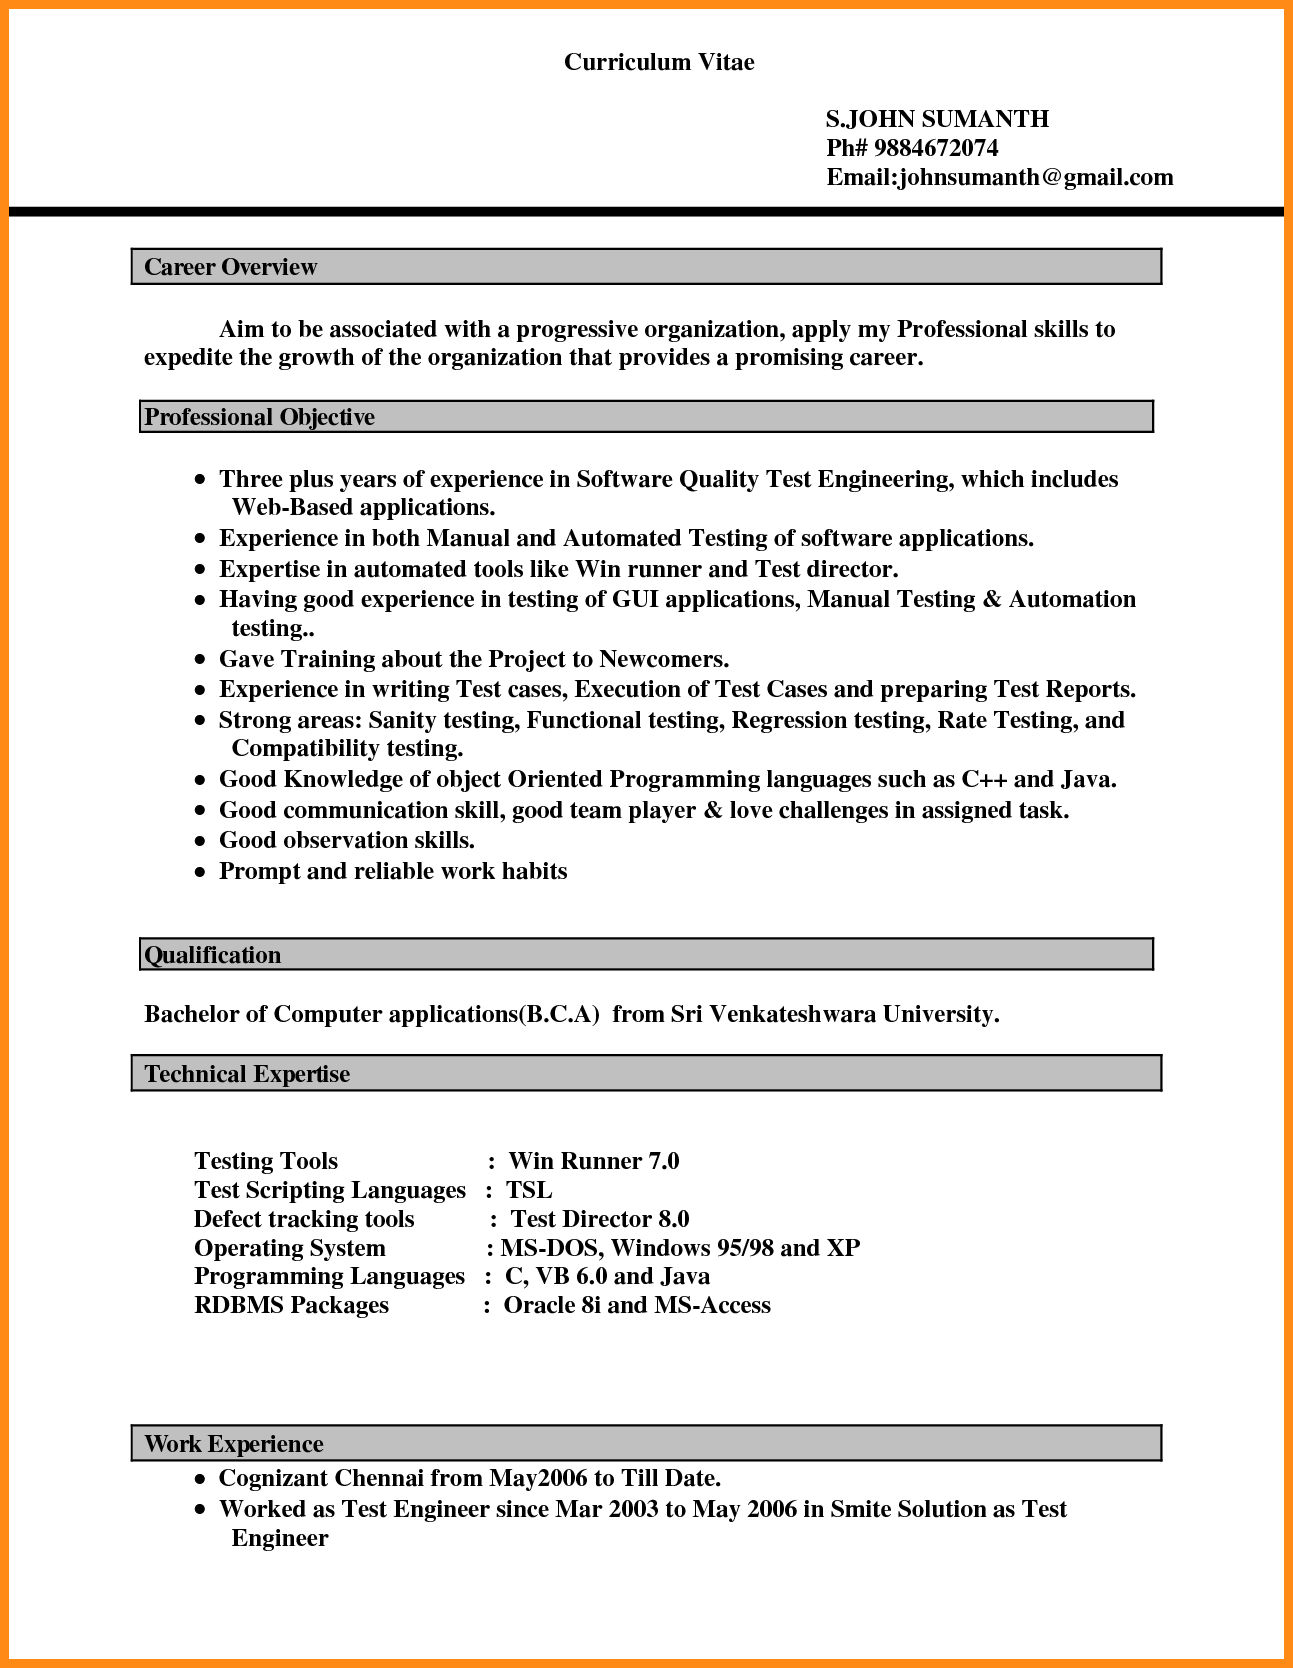 6+ Download Resume Templates Microsoft Word 2007 | Odr2017 For Resume Templates Word 2007